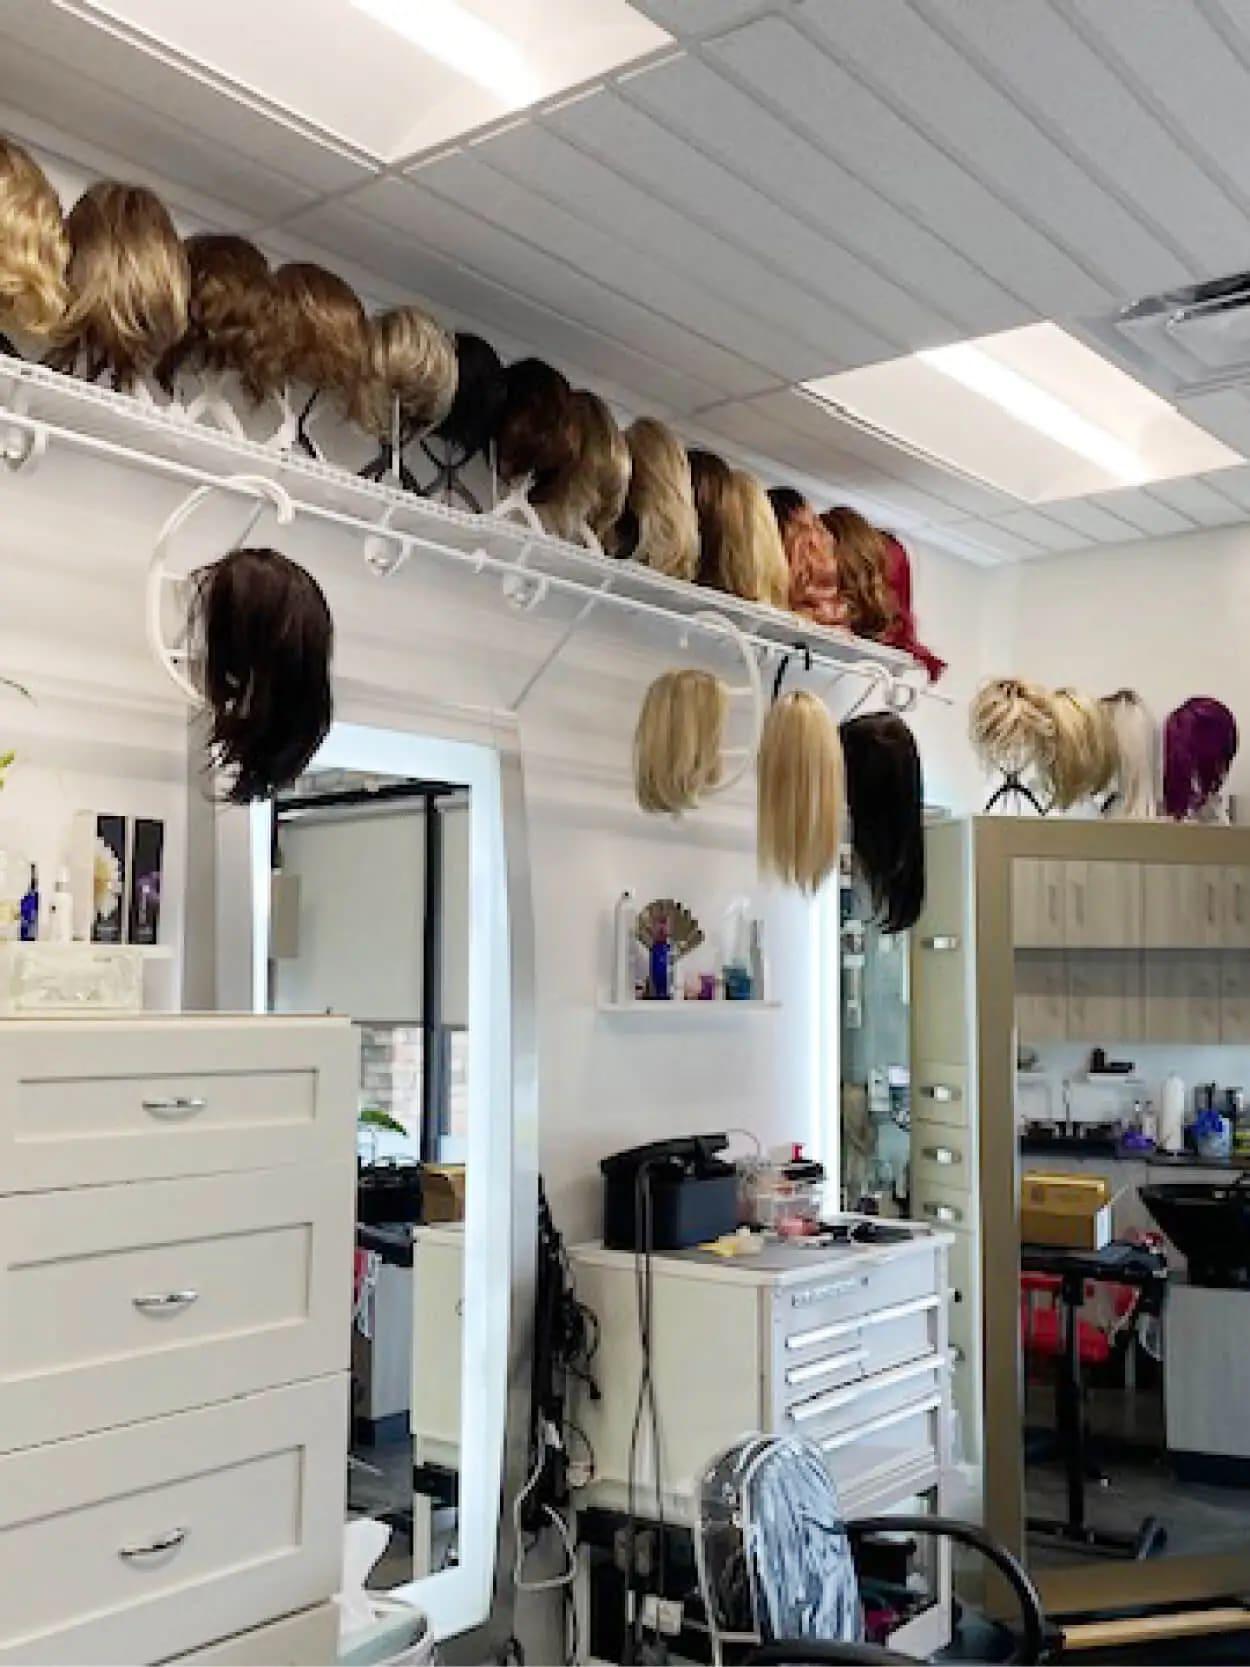 Lordhair Partner Hair System Salon in the USA